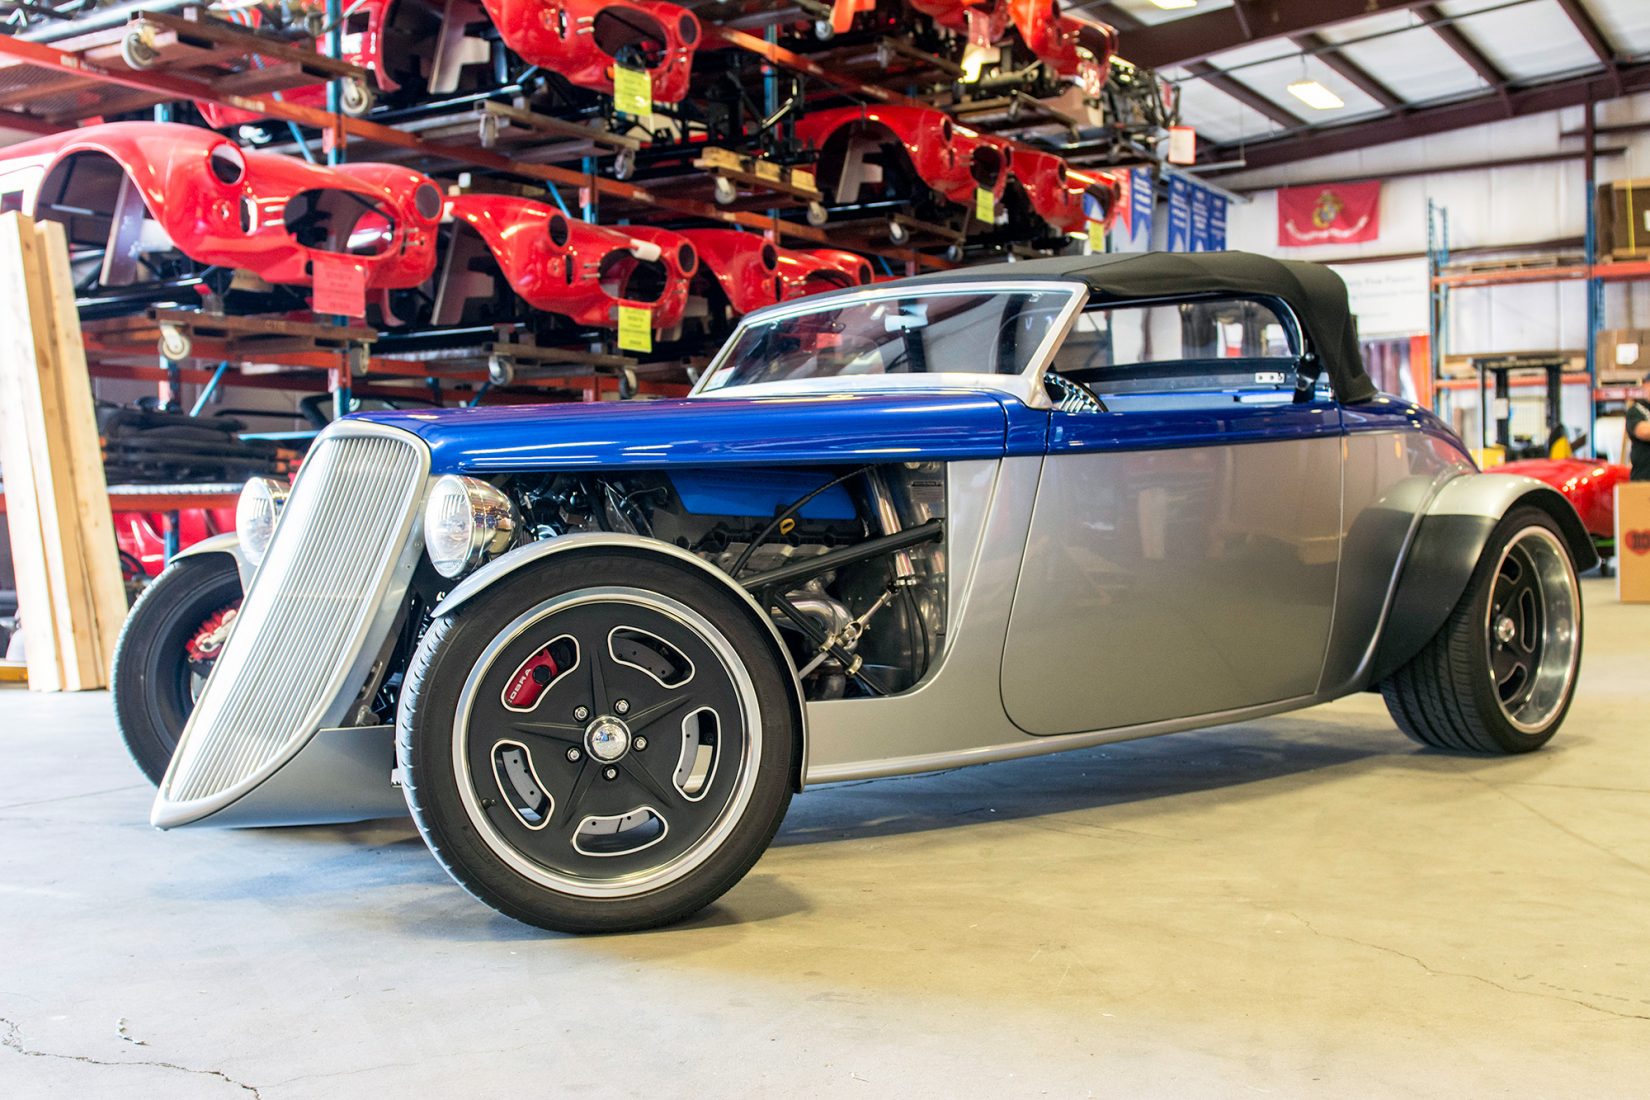 Factory Five Dir. of Engineering Jesper I. drives his ’33 daily to work.